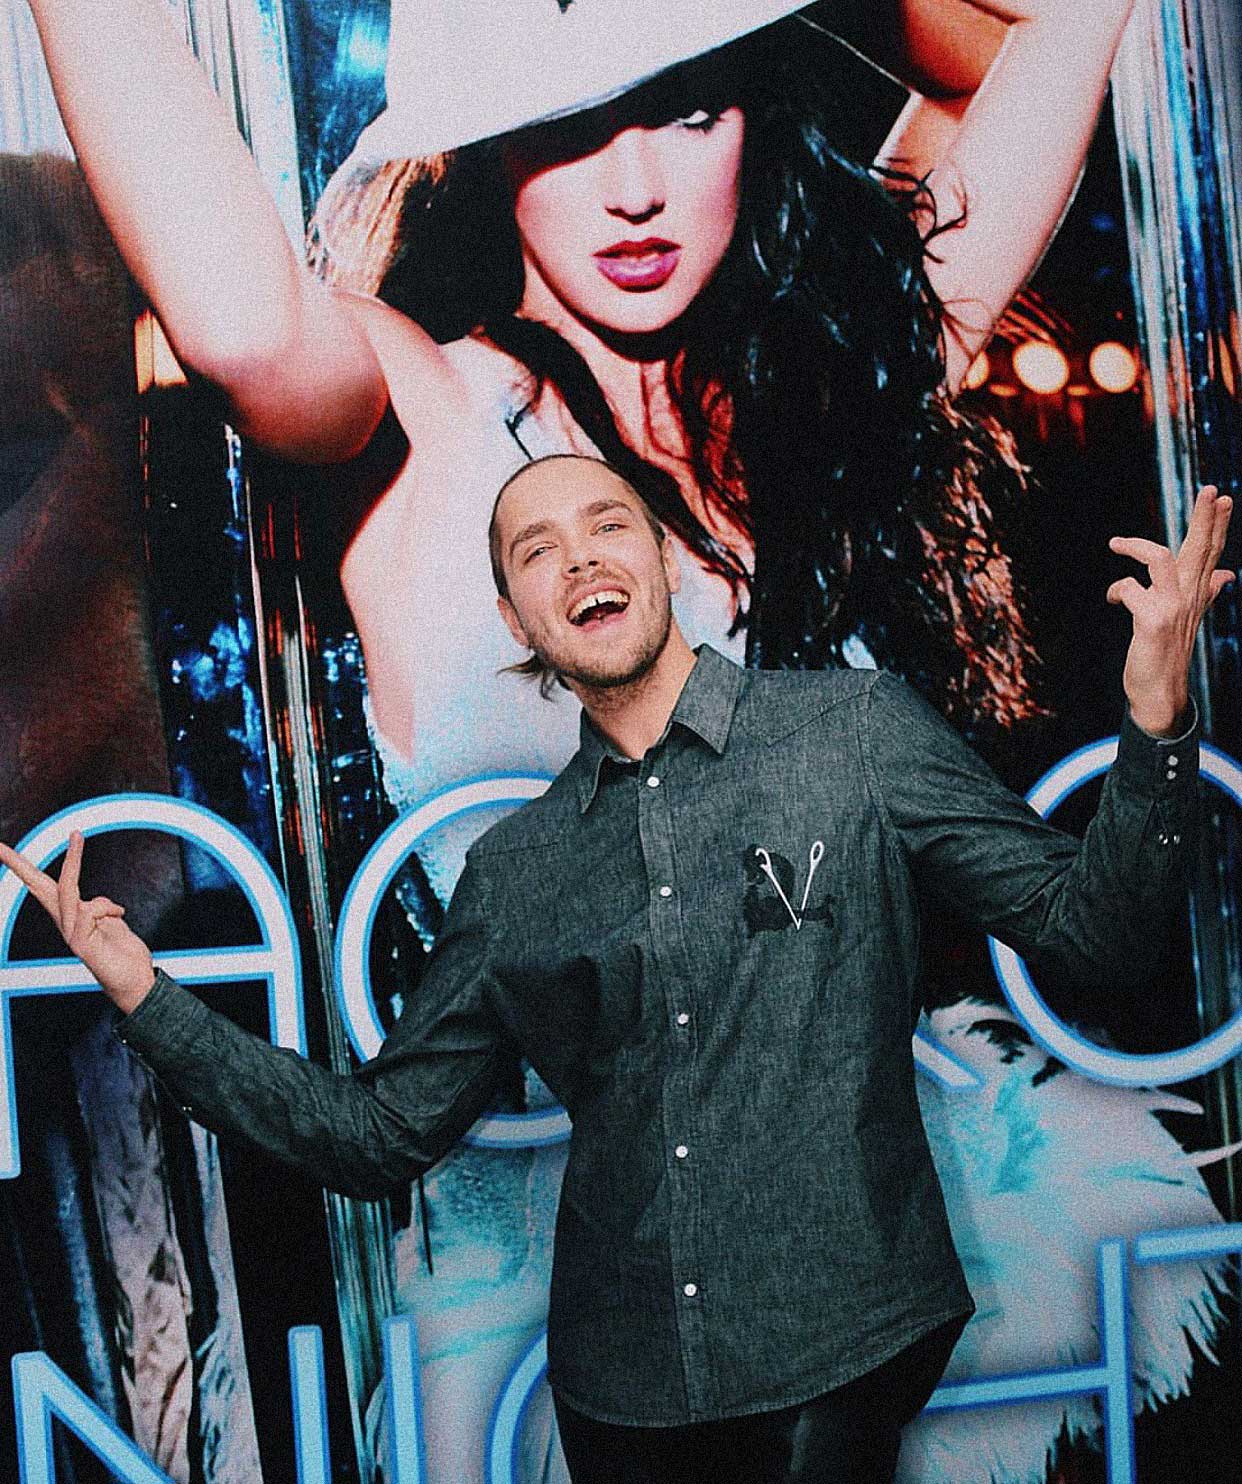 Aleksander is seen in front of a large Britney poster.